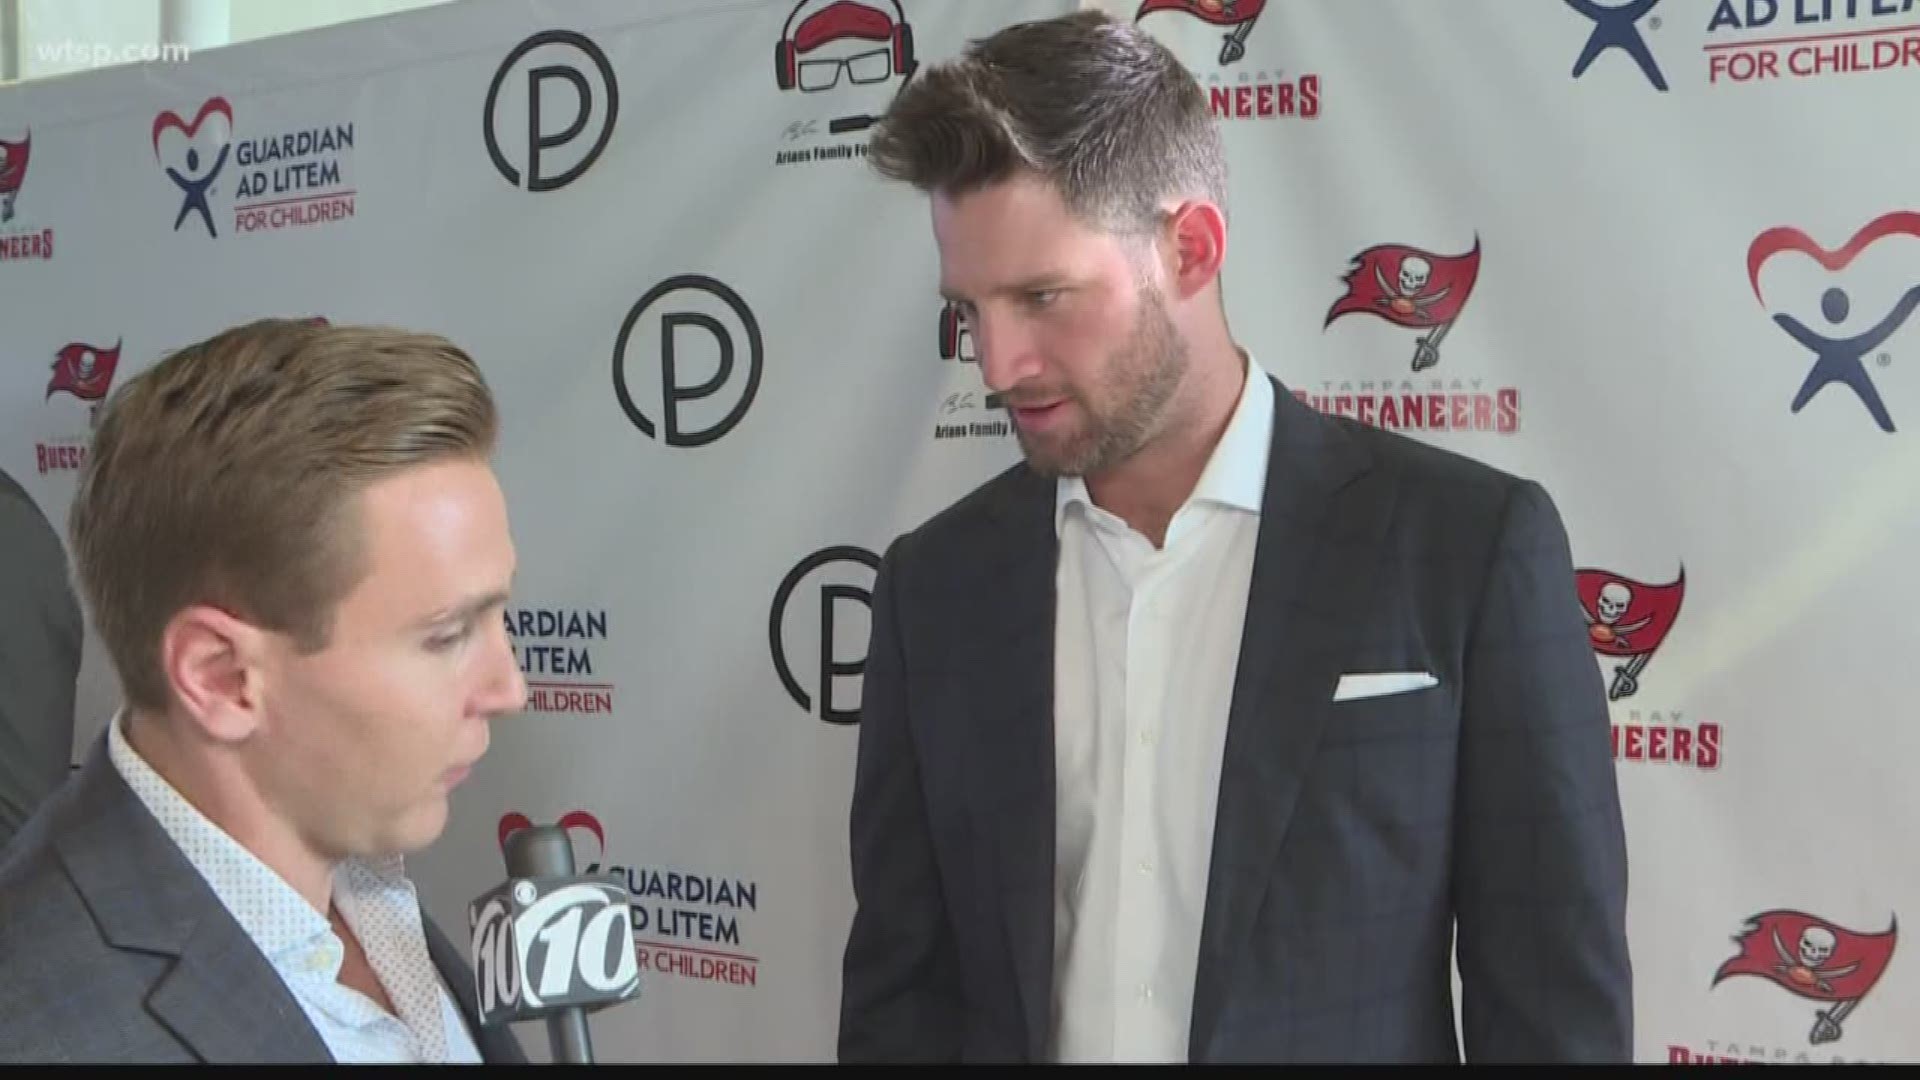 10Sports Justin Granit was at the red carpet event where we the Bucs were dressed to impress.